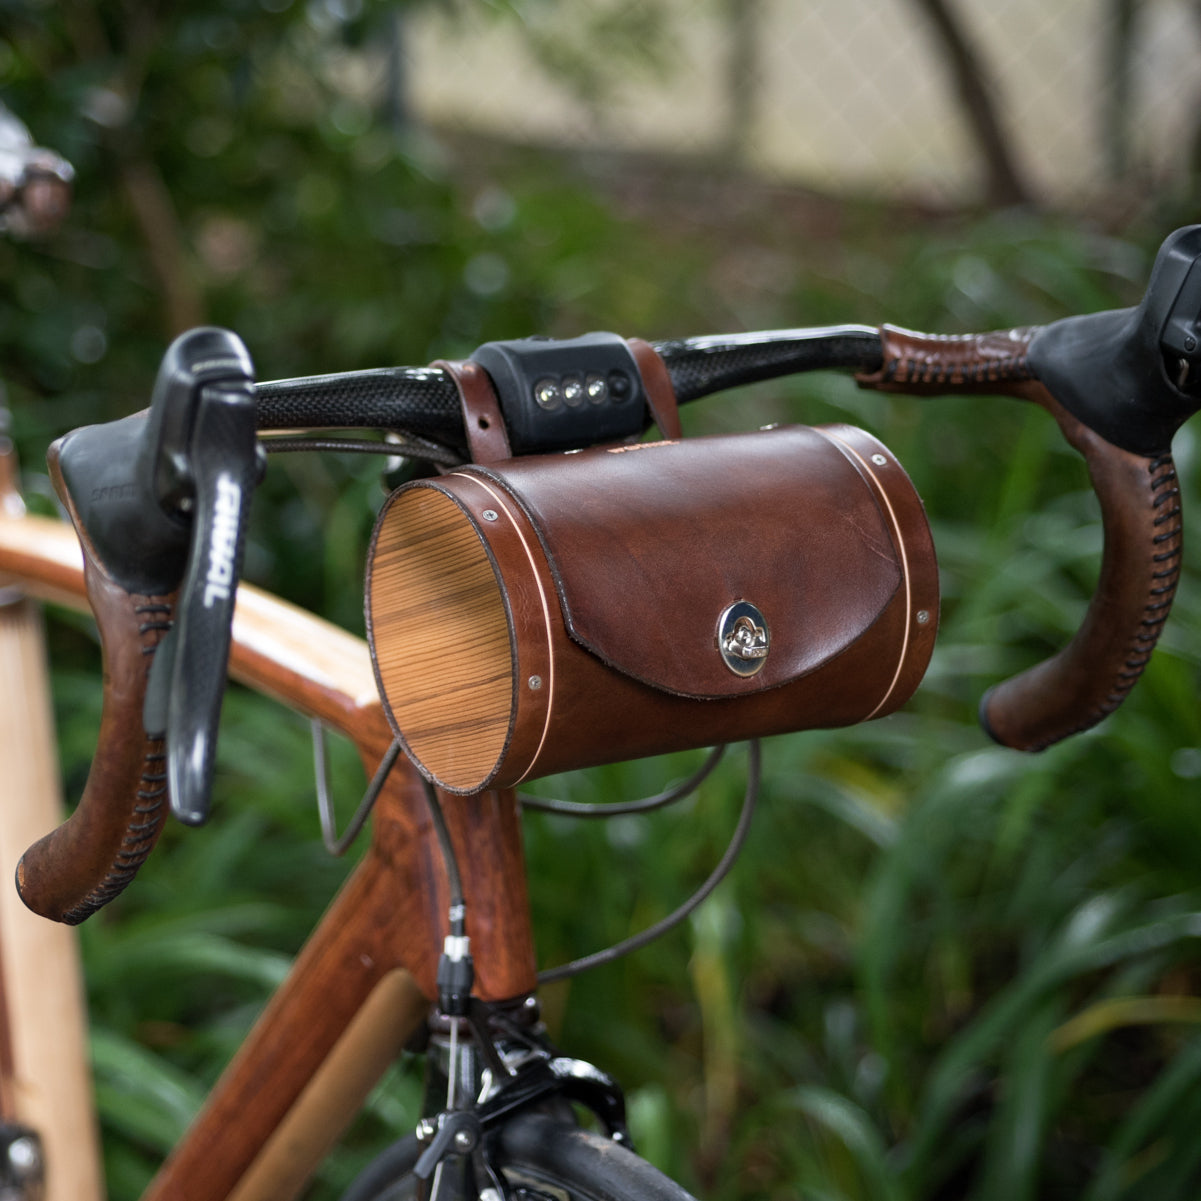 Bags baskets & panniers - Cyclechic